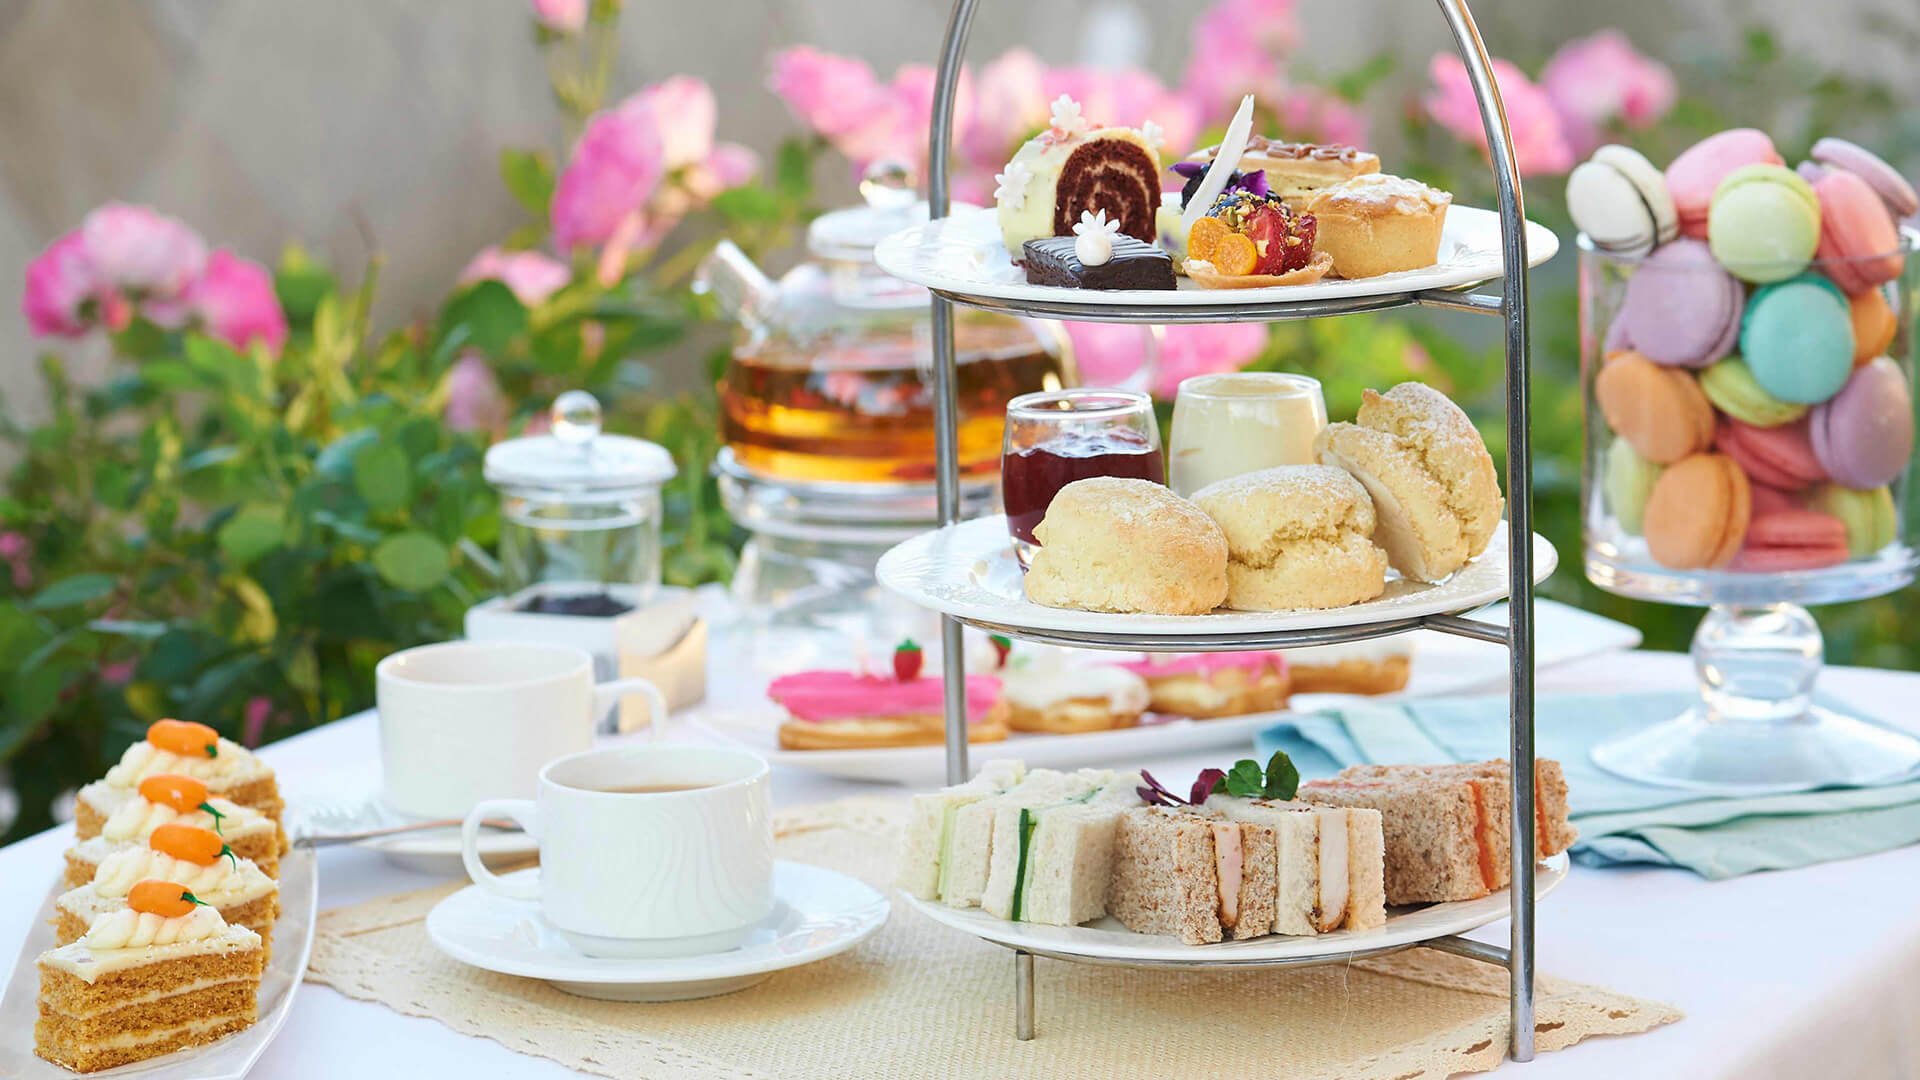 From Afternoon To High Tea Your Guide To Hosting Tea Parties The Hillcart Tales Blog